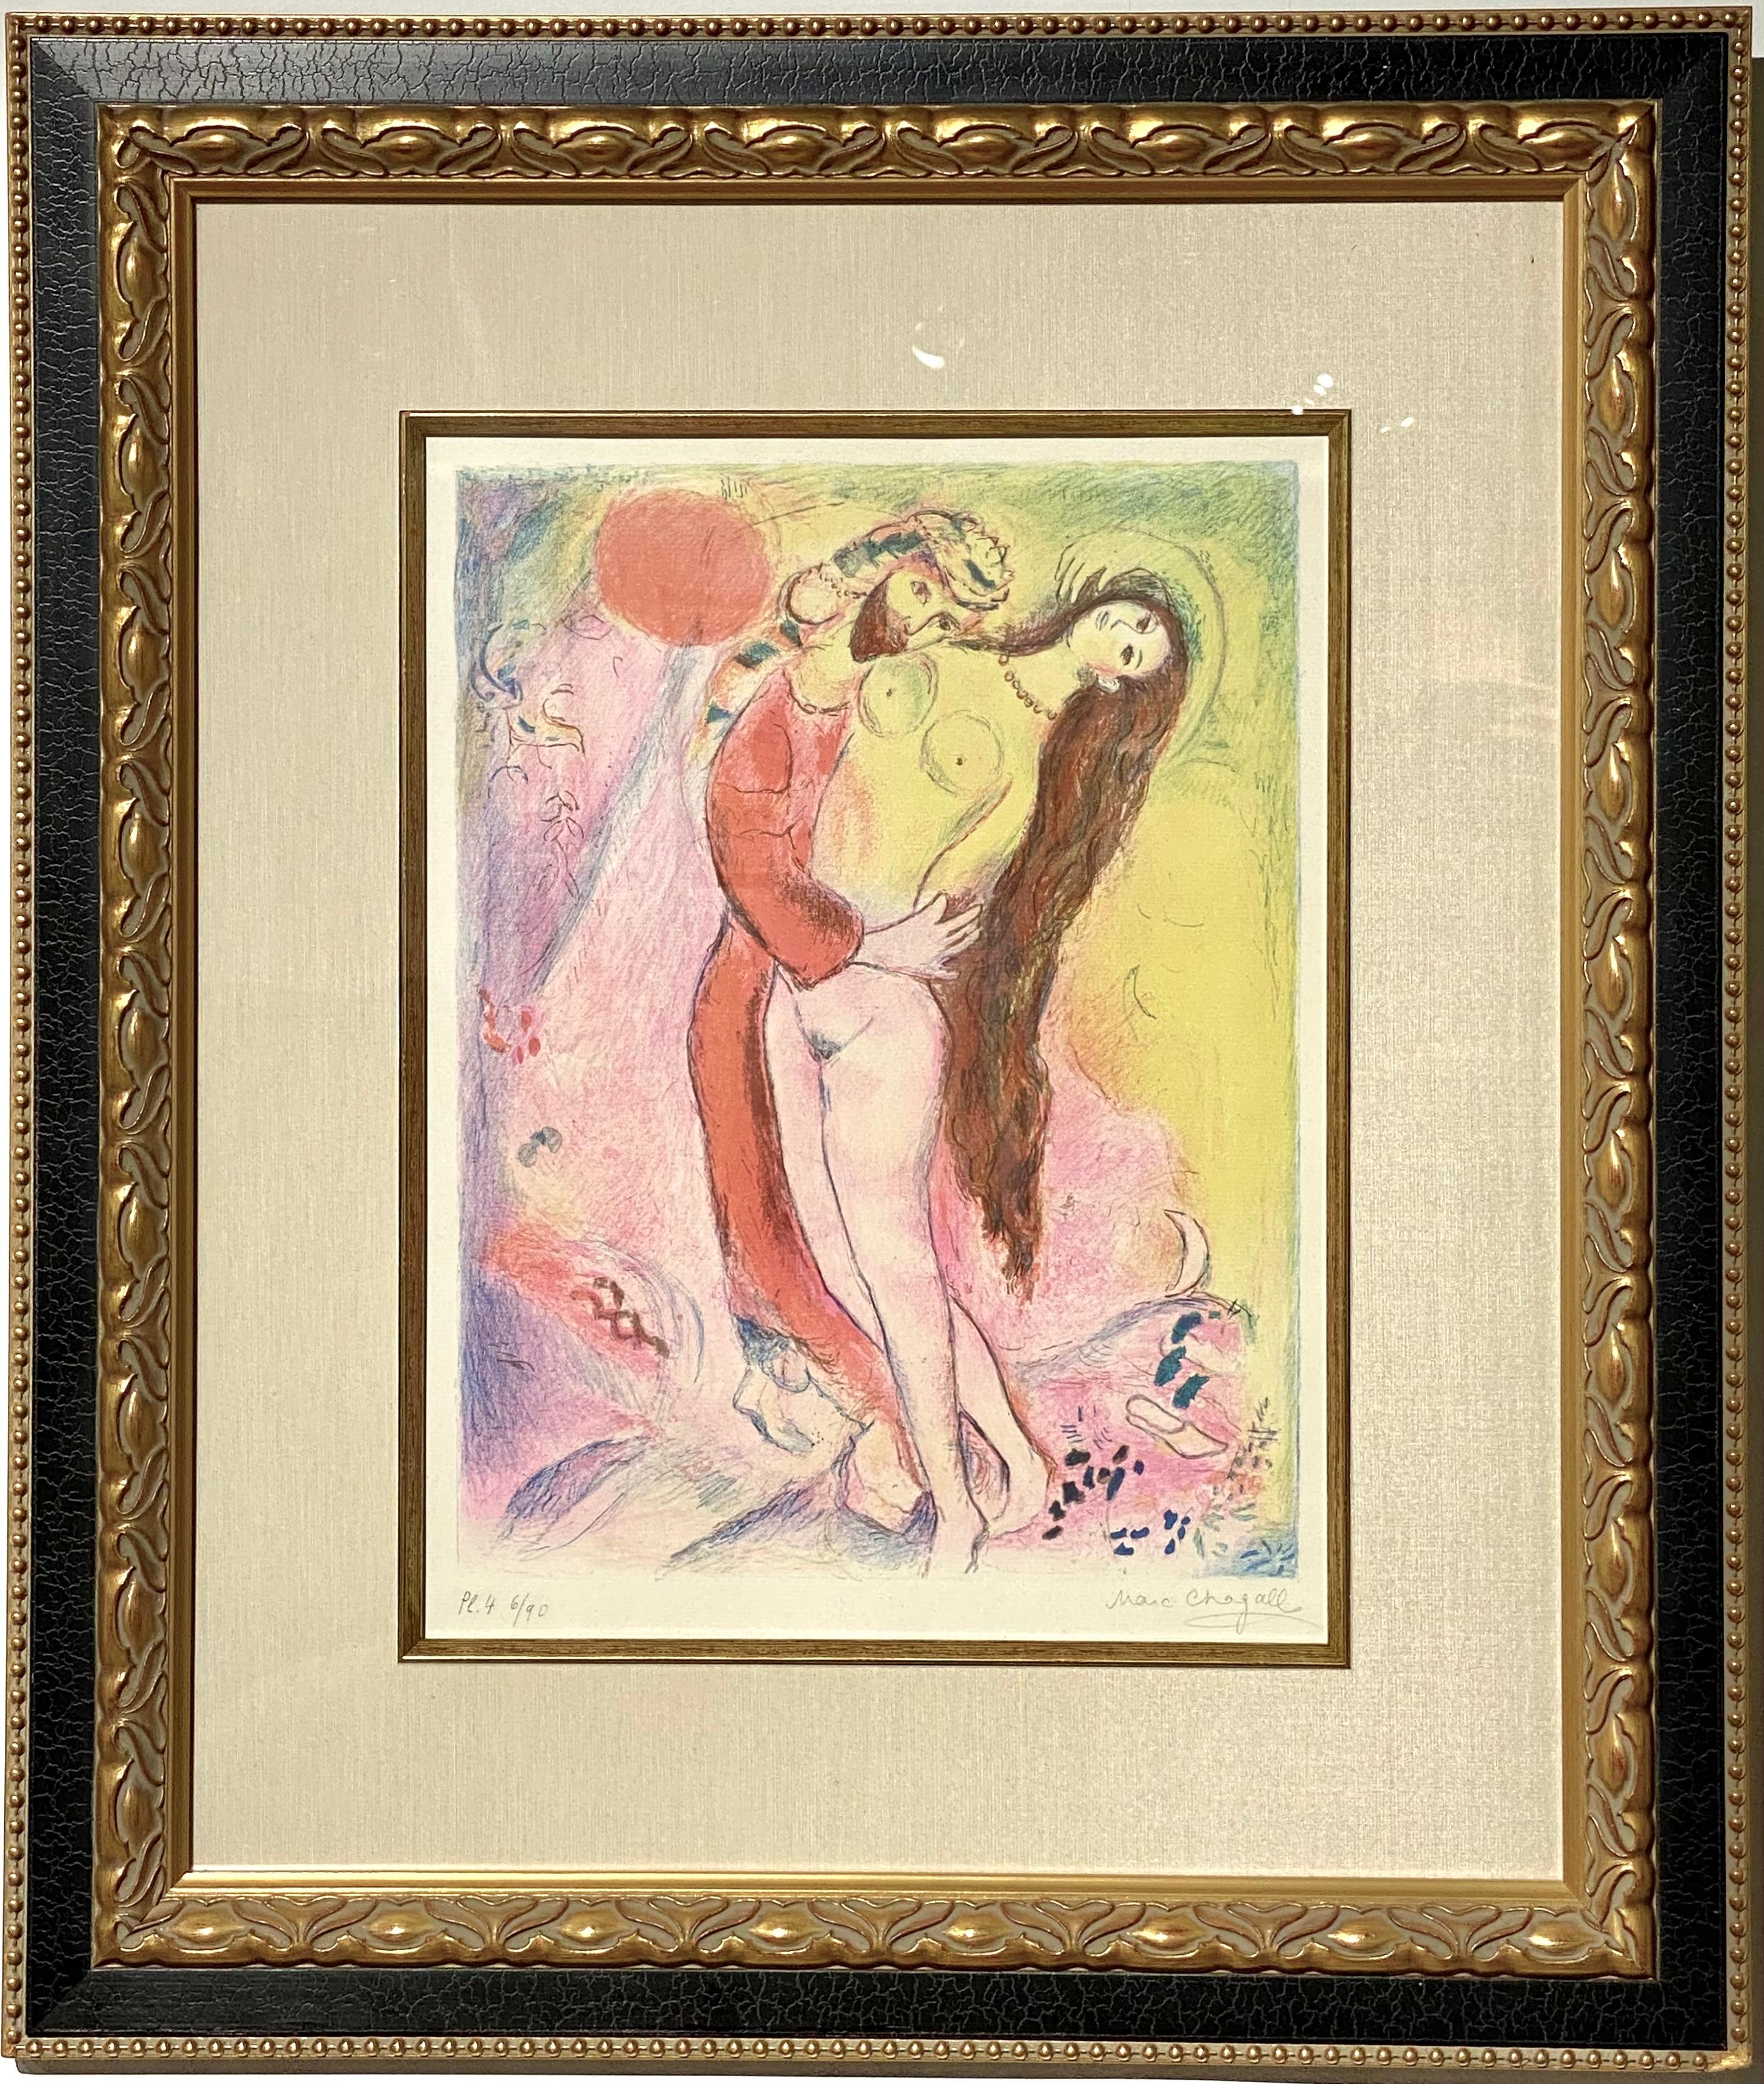 MARC CHAGALL 1887 - 1985                                                    
Disrobing her with his own hand, the King looked upon her body and saw it as if it were a silver ingot...: plate 4, from Four Tales from the Arabian Nights (M. 39, see C.